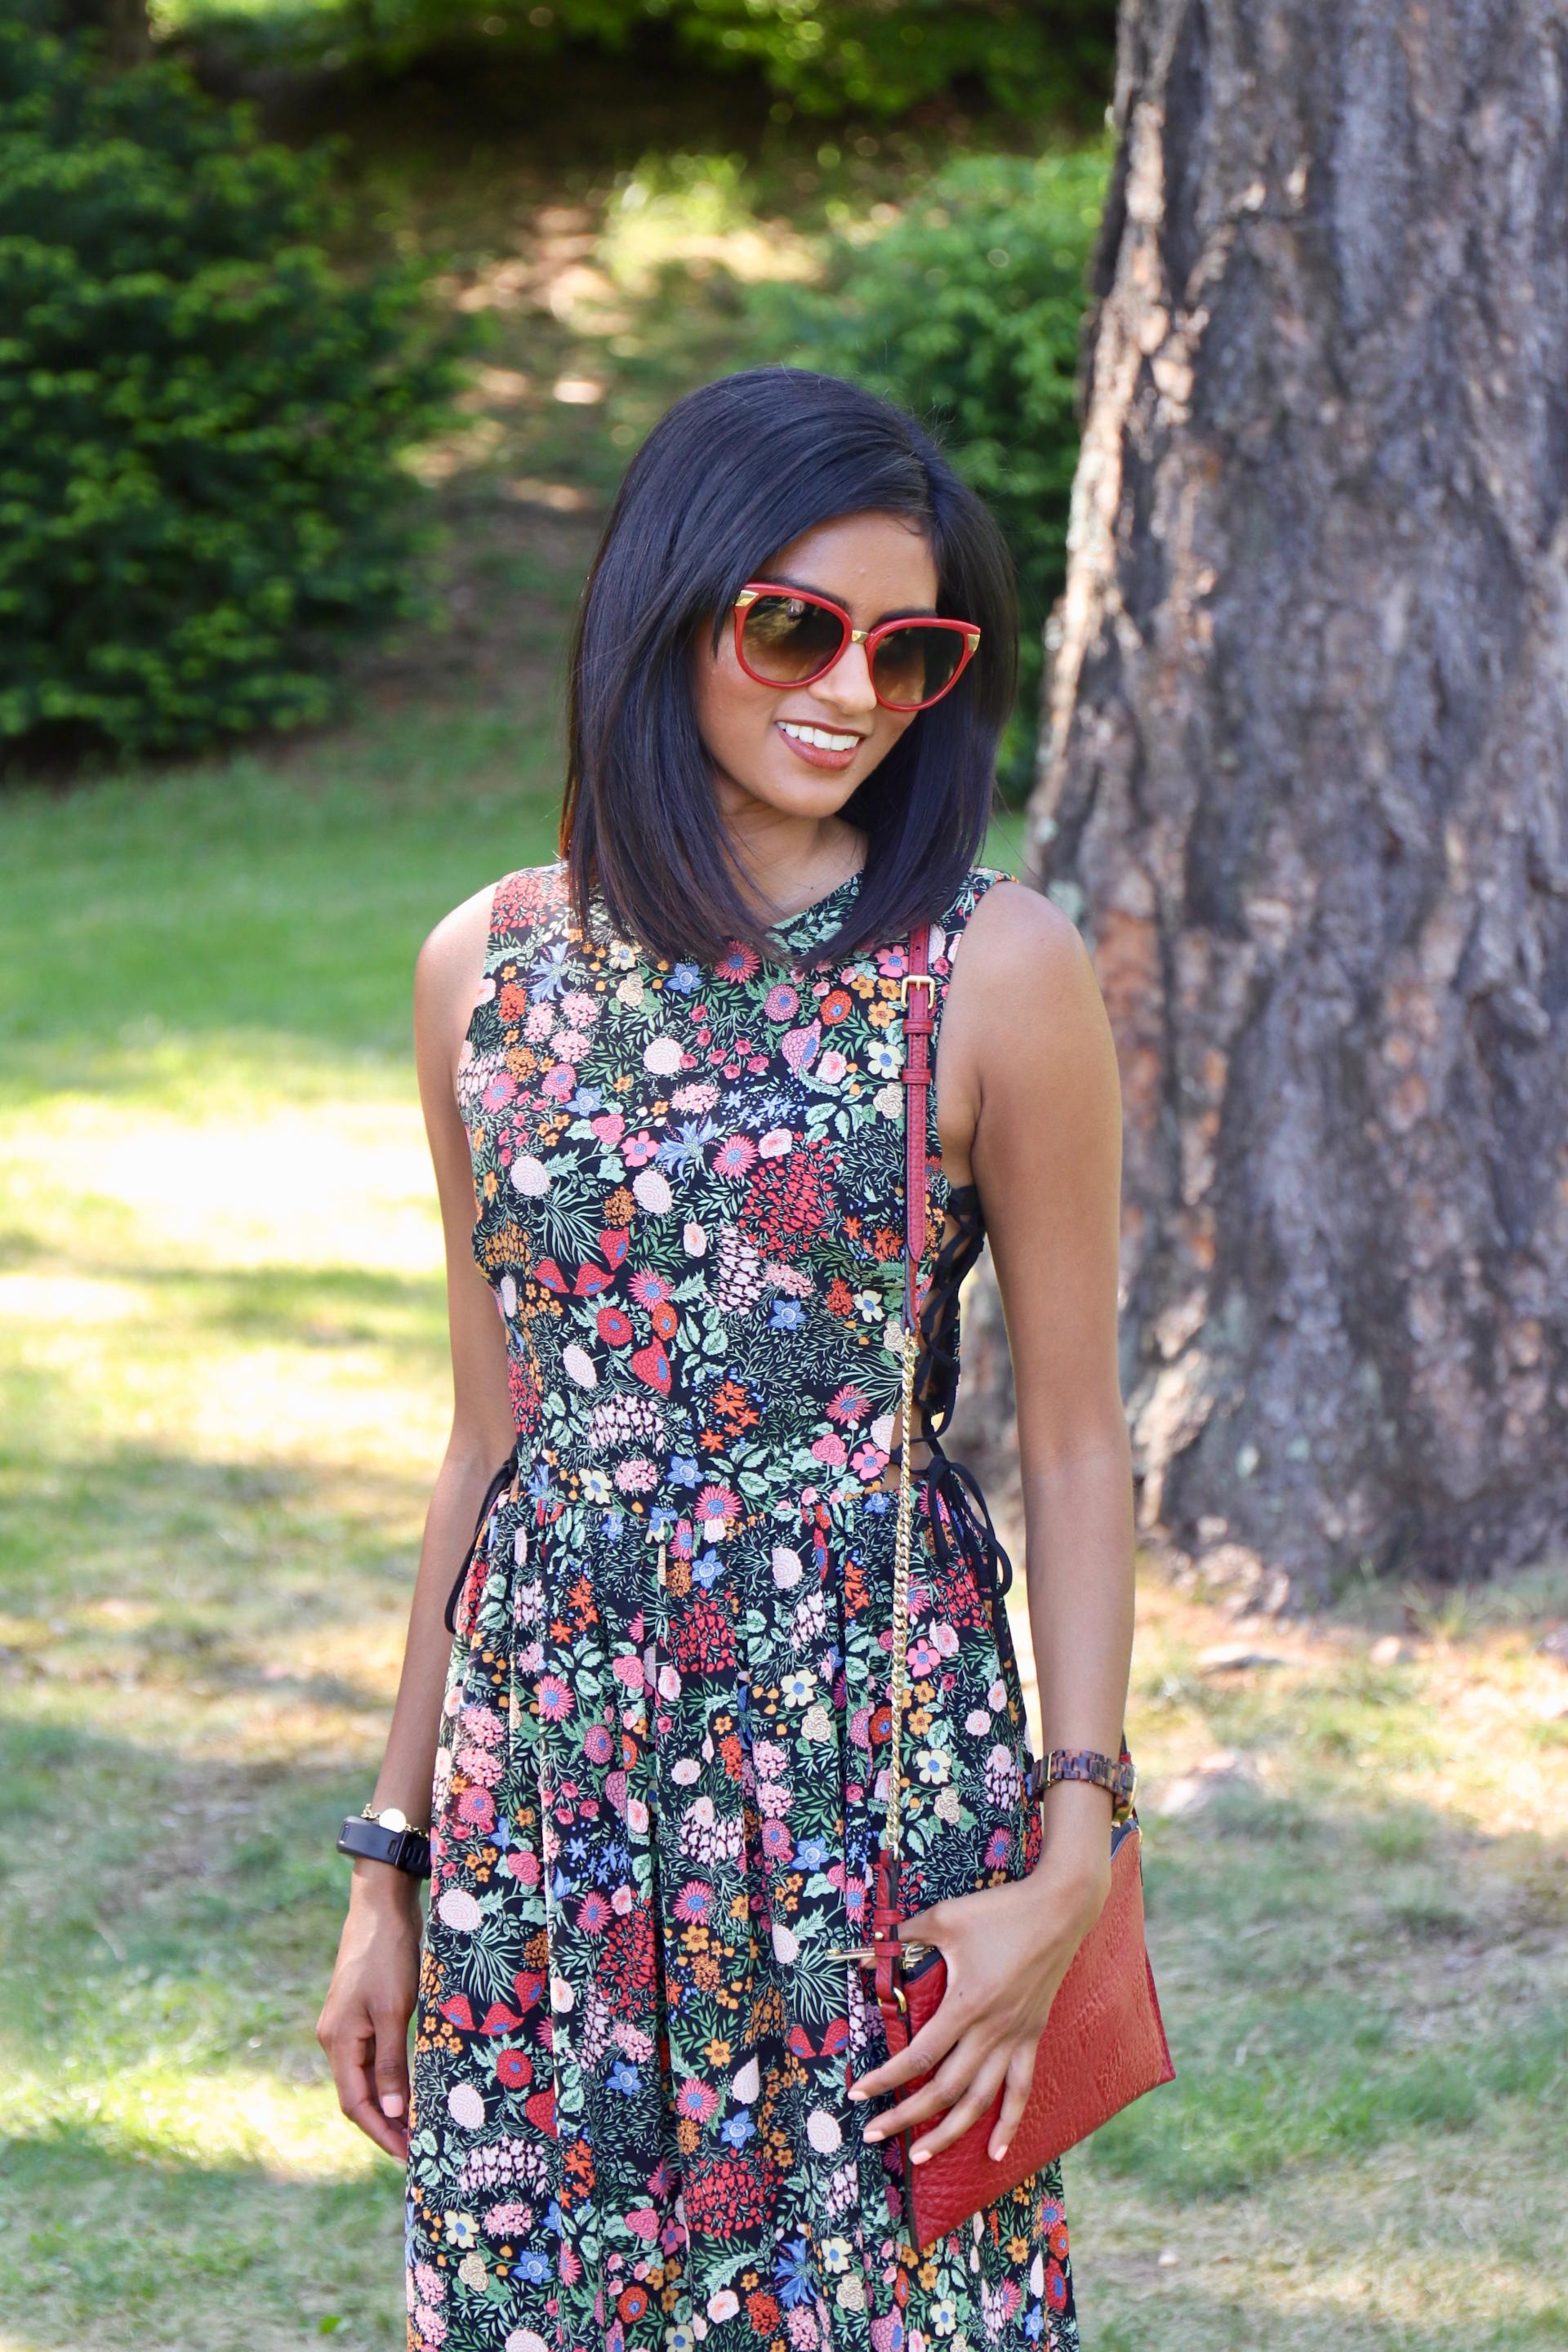 Why I Love Summer Dresses - Life with Laila